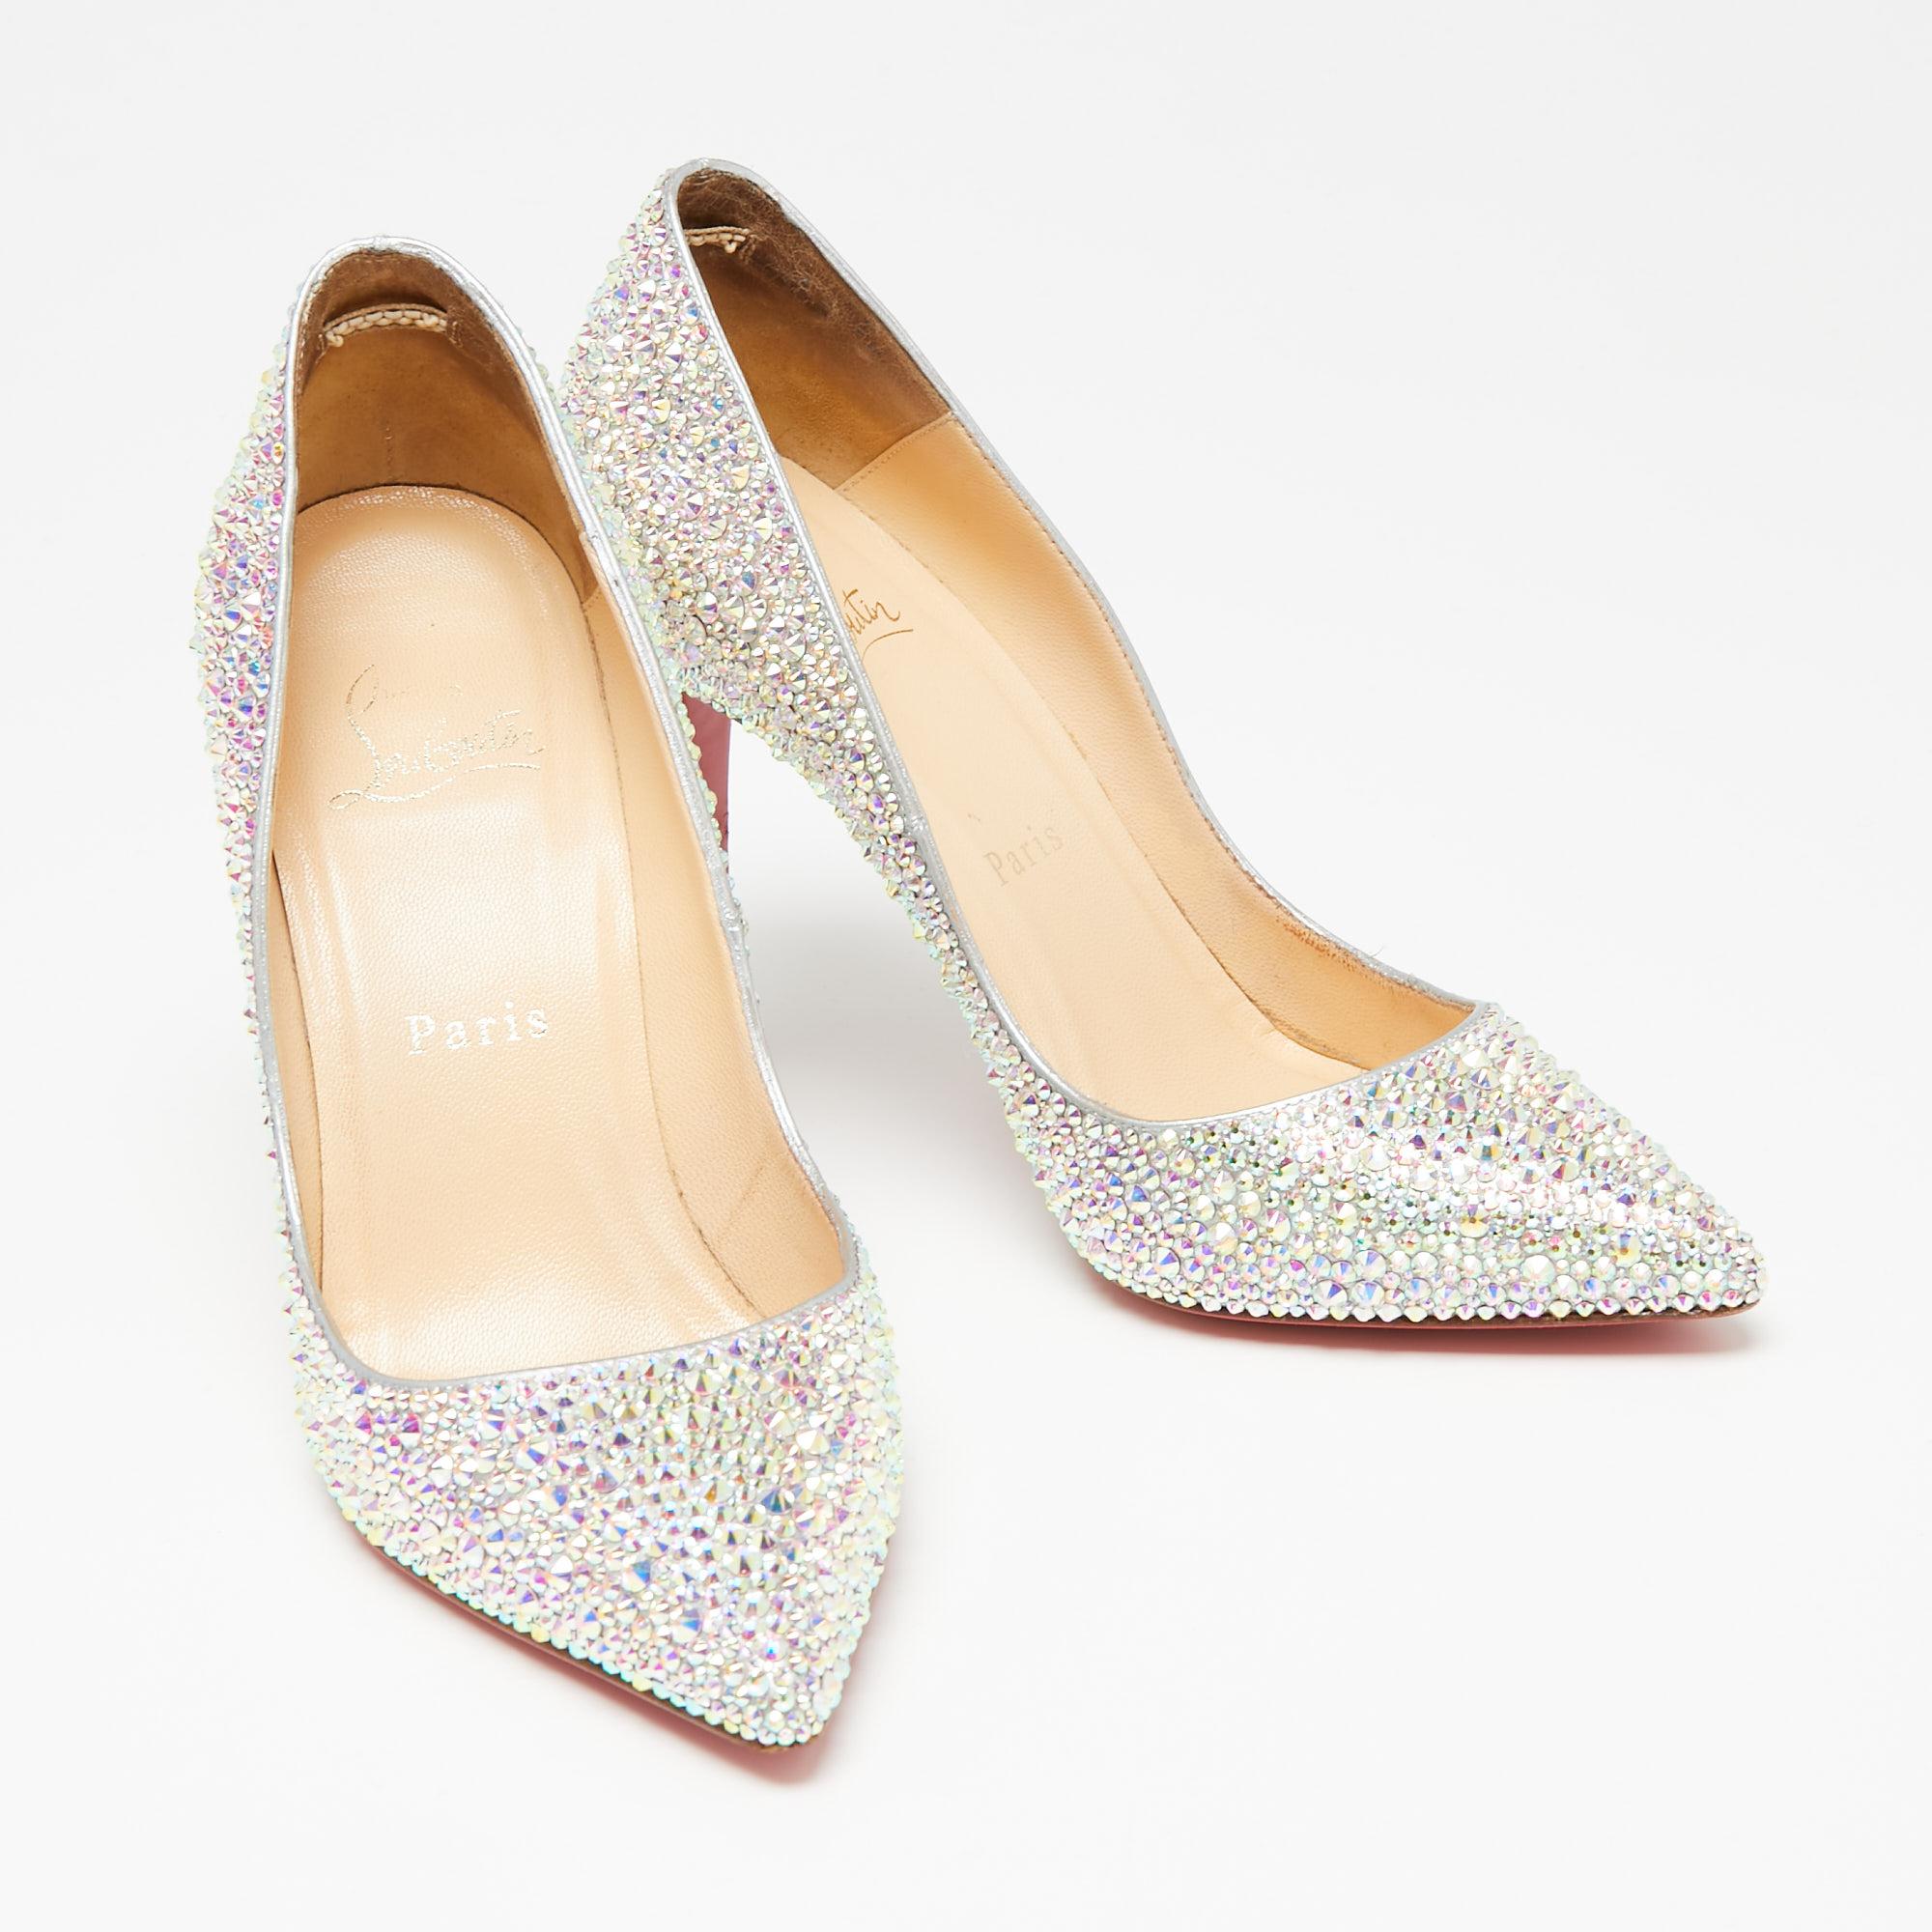 Women's Christian Louboutin Multicolor Leather Pigalle Strass Degrade Pumps Size 36